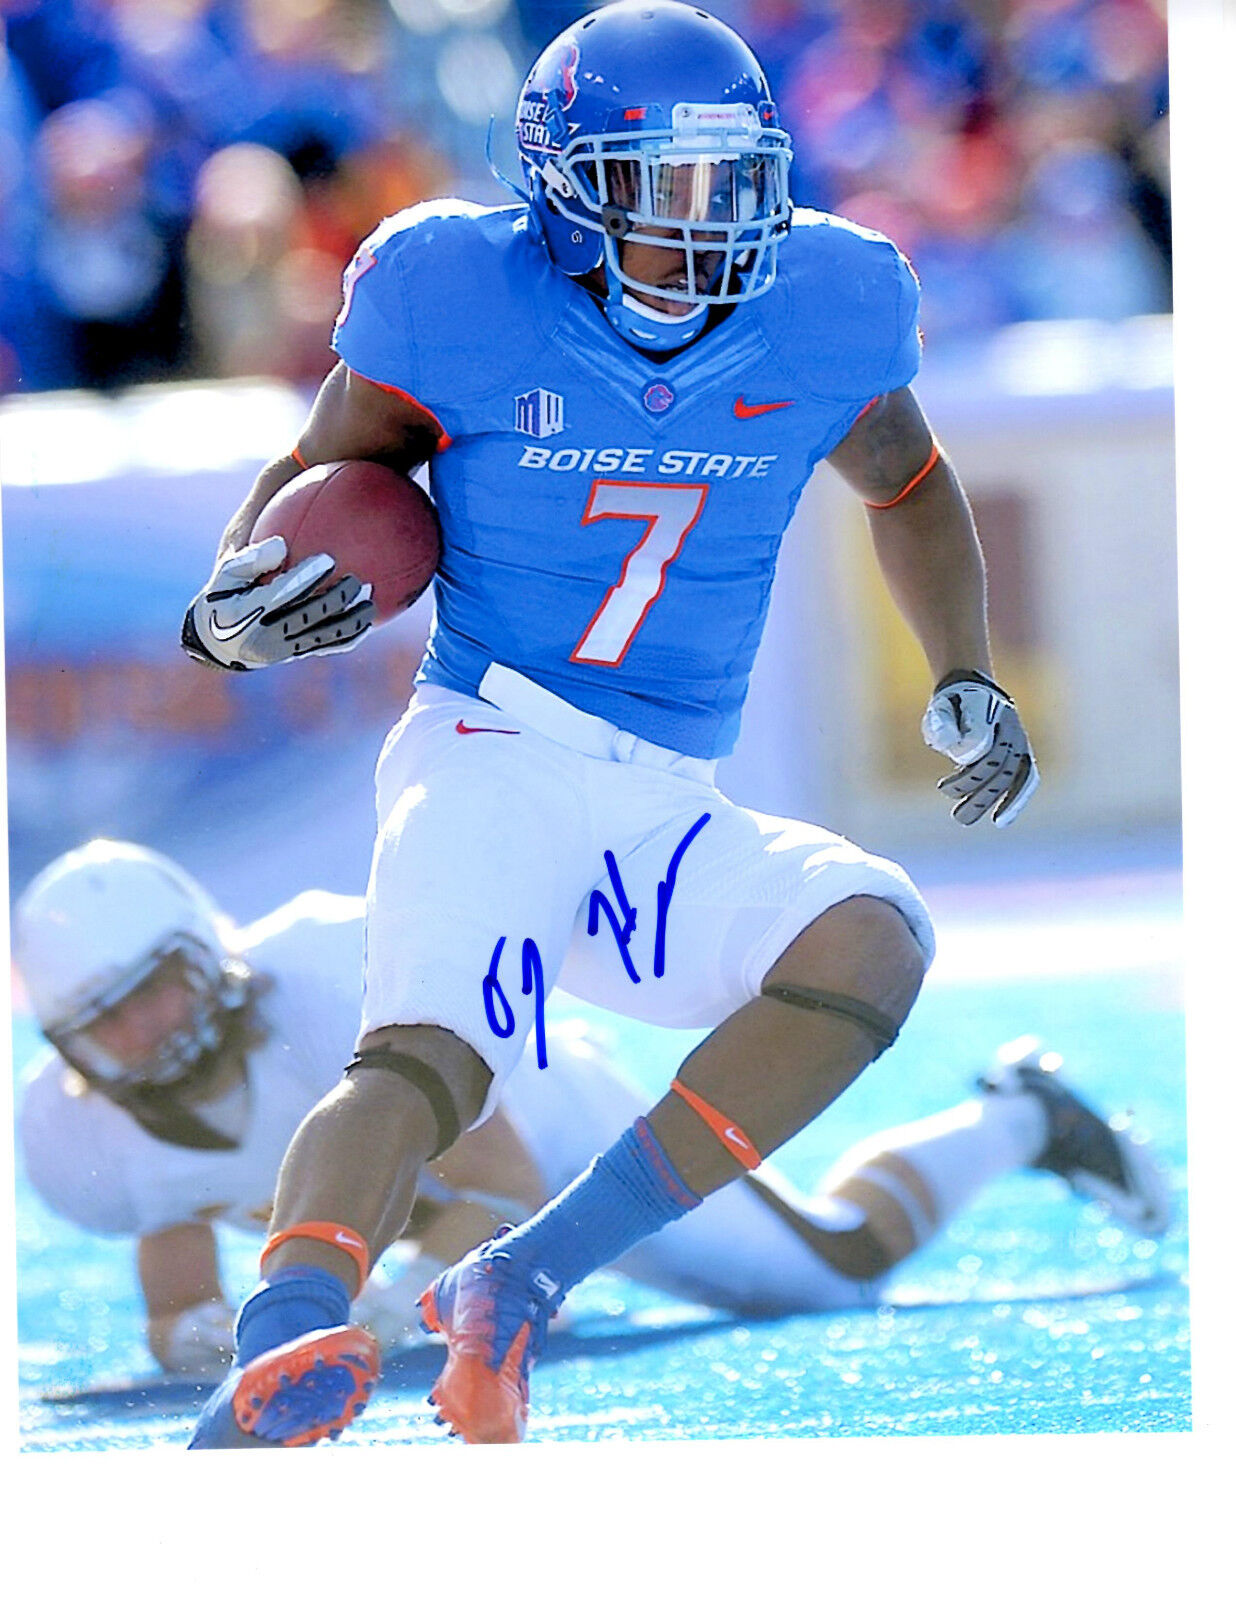 DJ Harper Boise State Broncos signed autographed football Photo Poster painting 2013 Draft